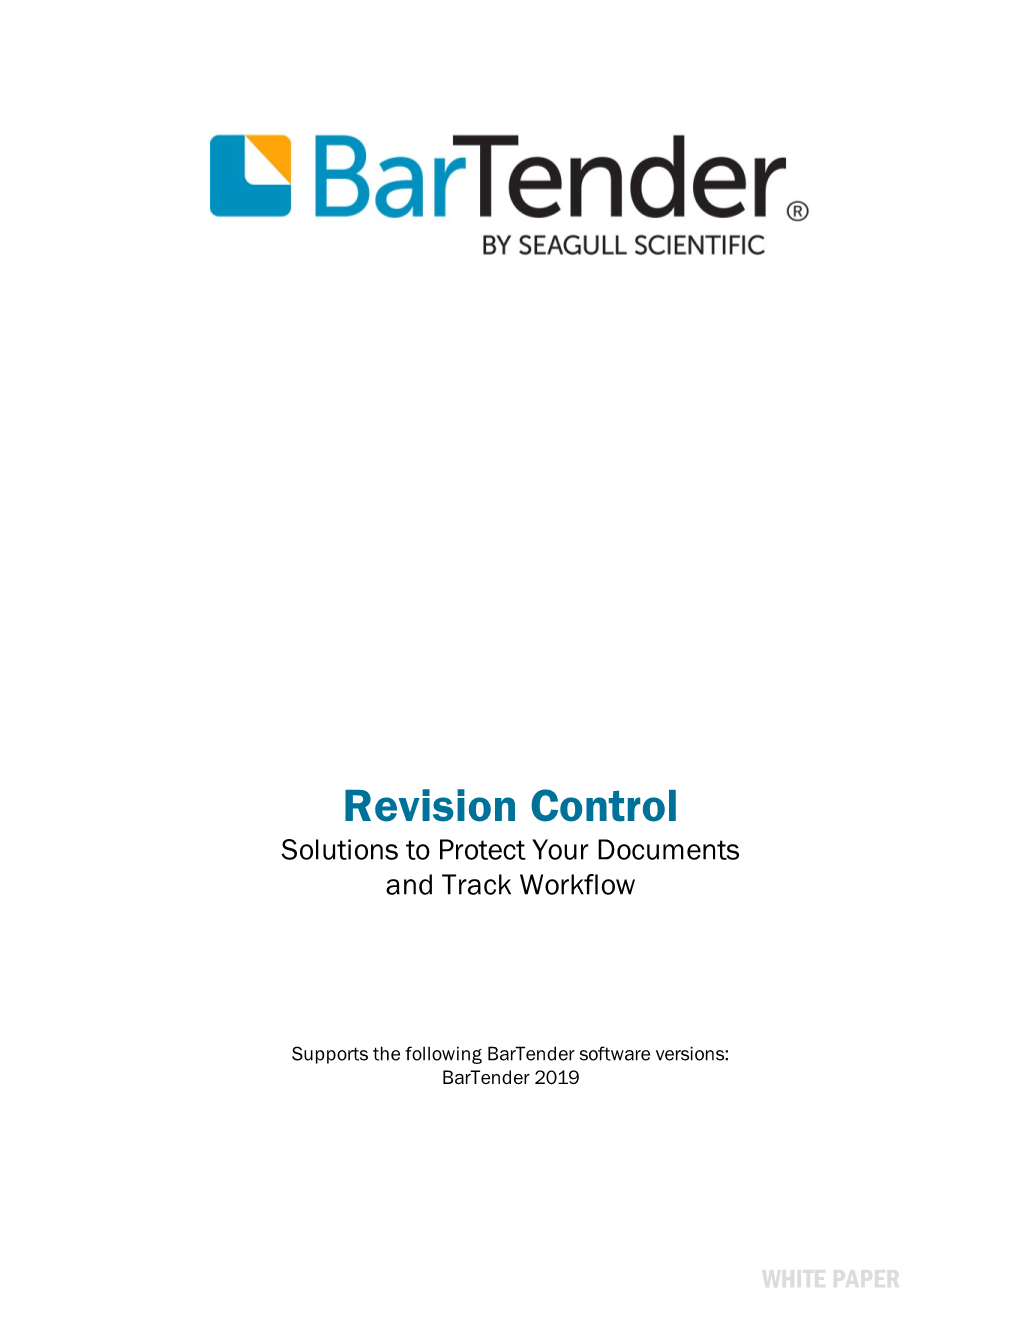 Revision Control Solutions to Protect Your Documents and Track Workflow